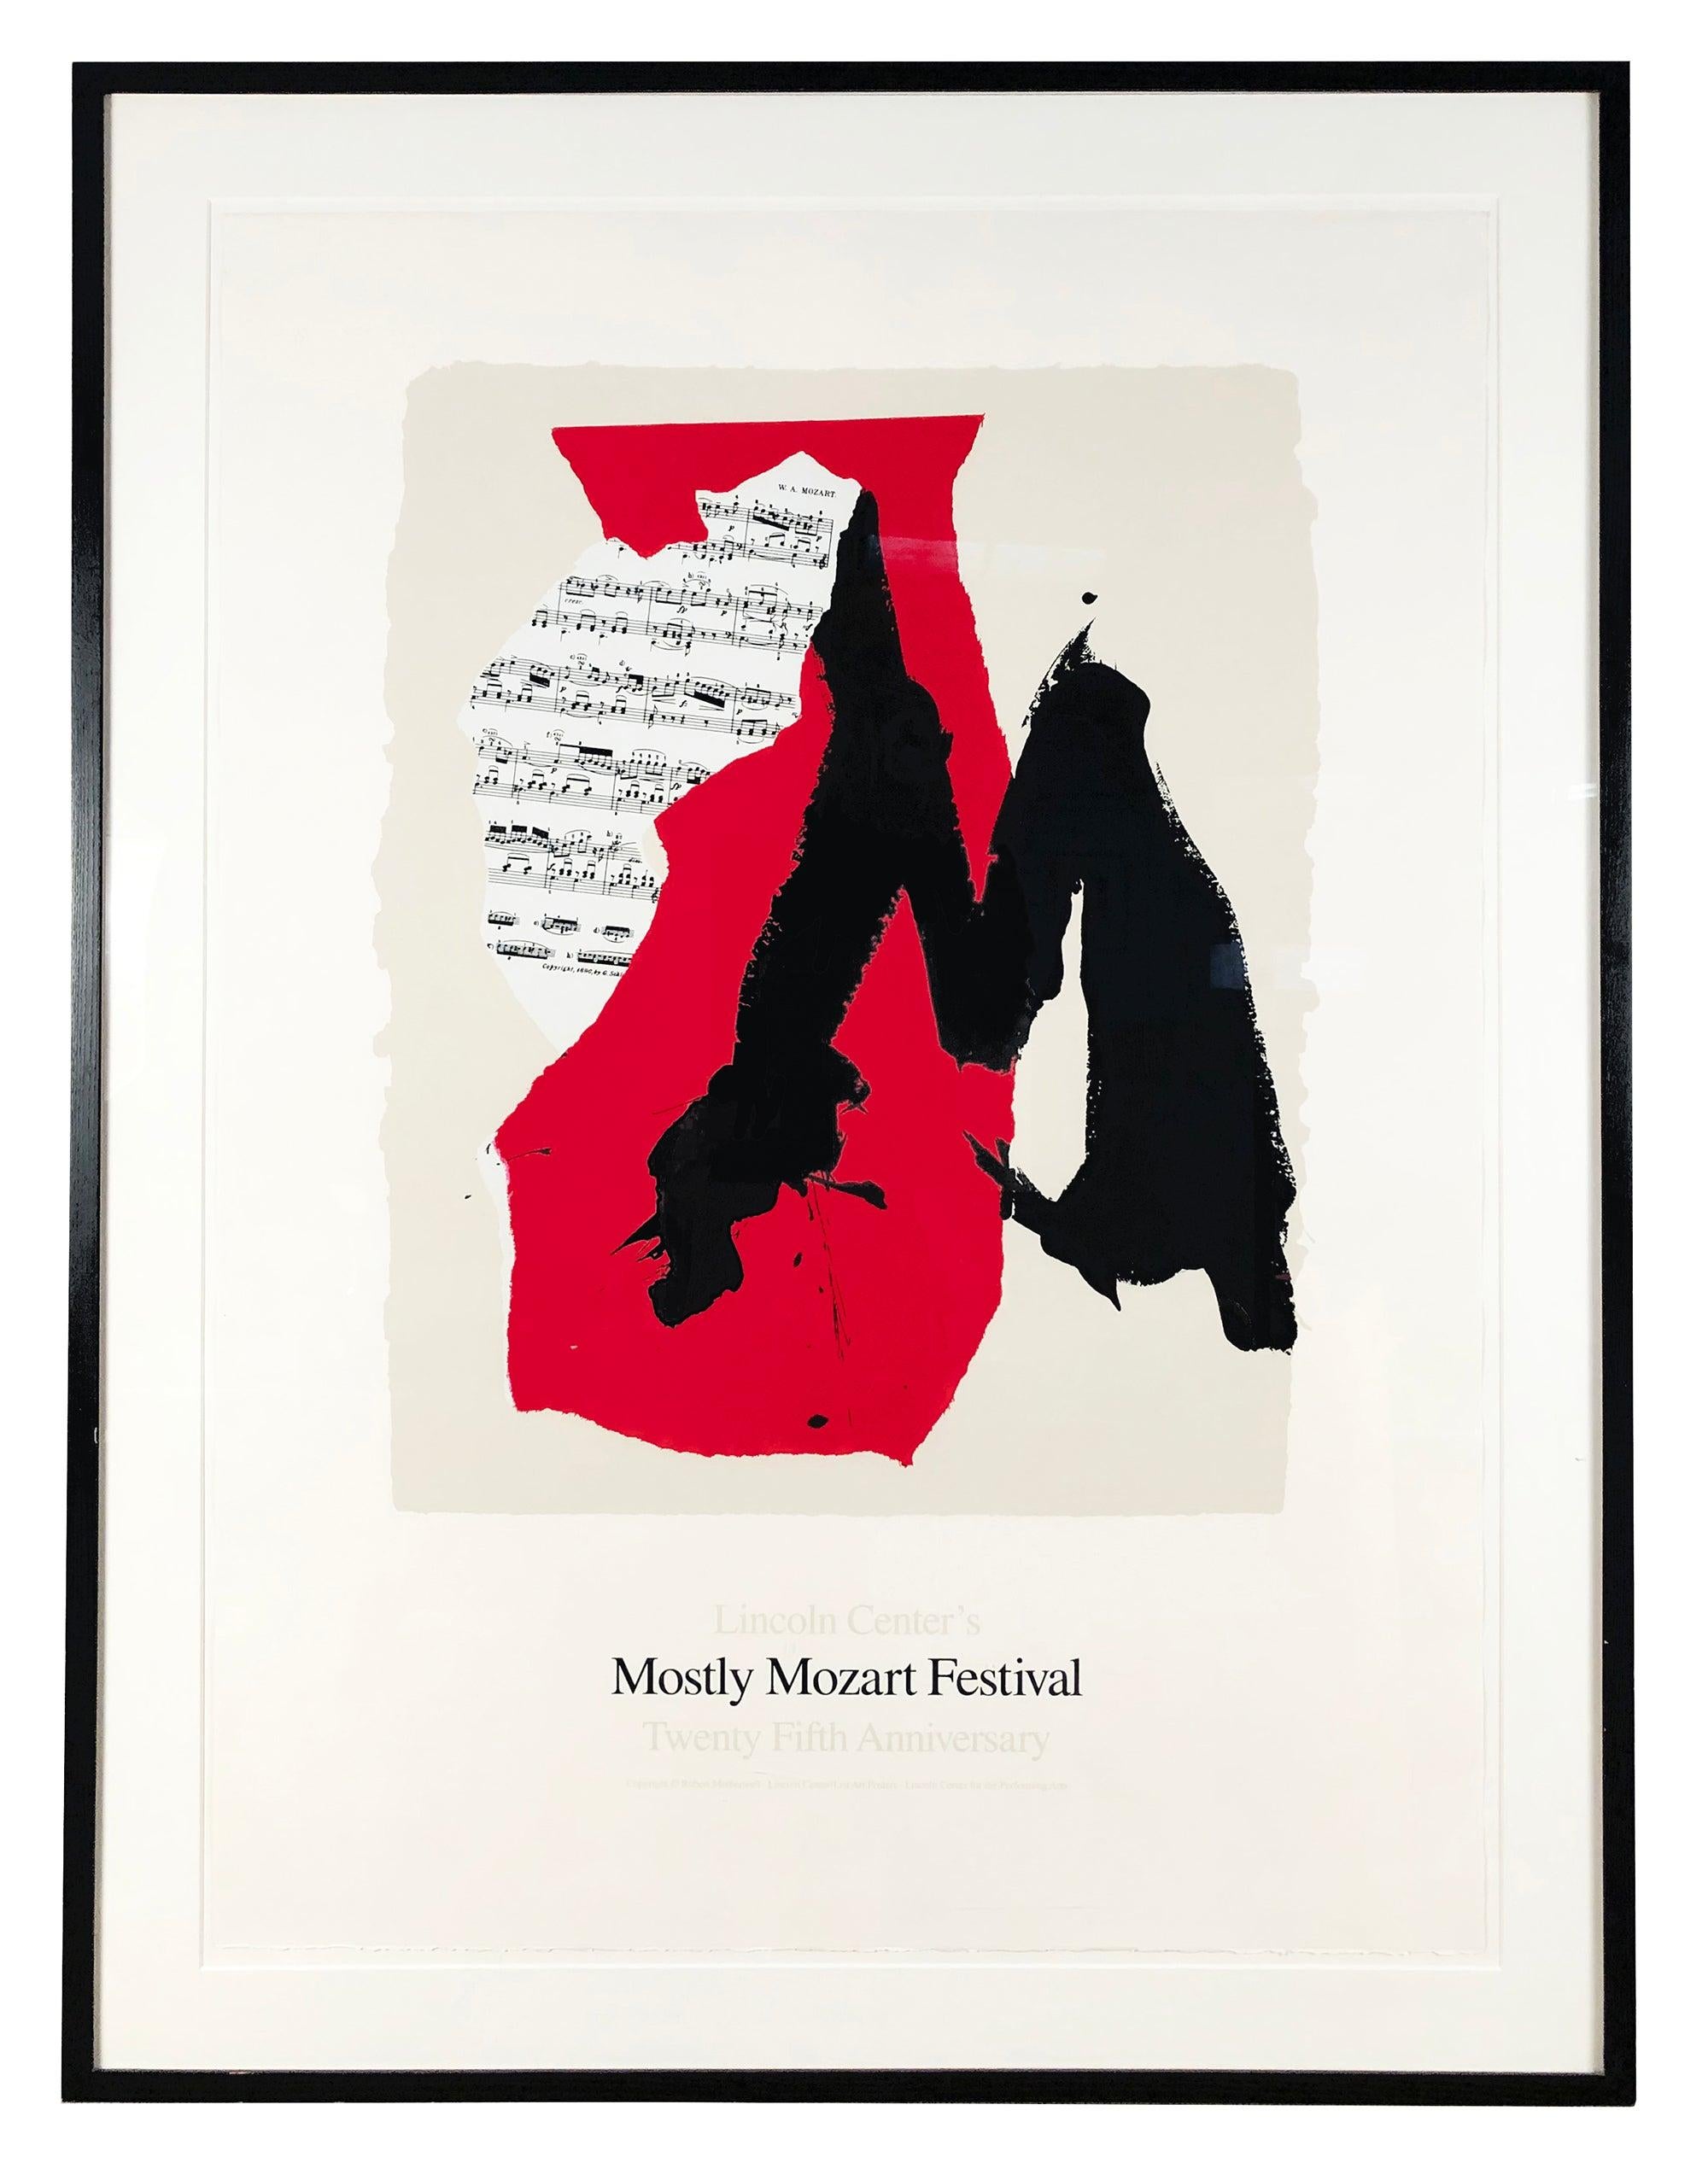 ROBERT MOTHERWELL Mostly Mozart Festival, 1991 First Edition - Print by Robert Motherwell